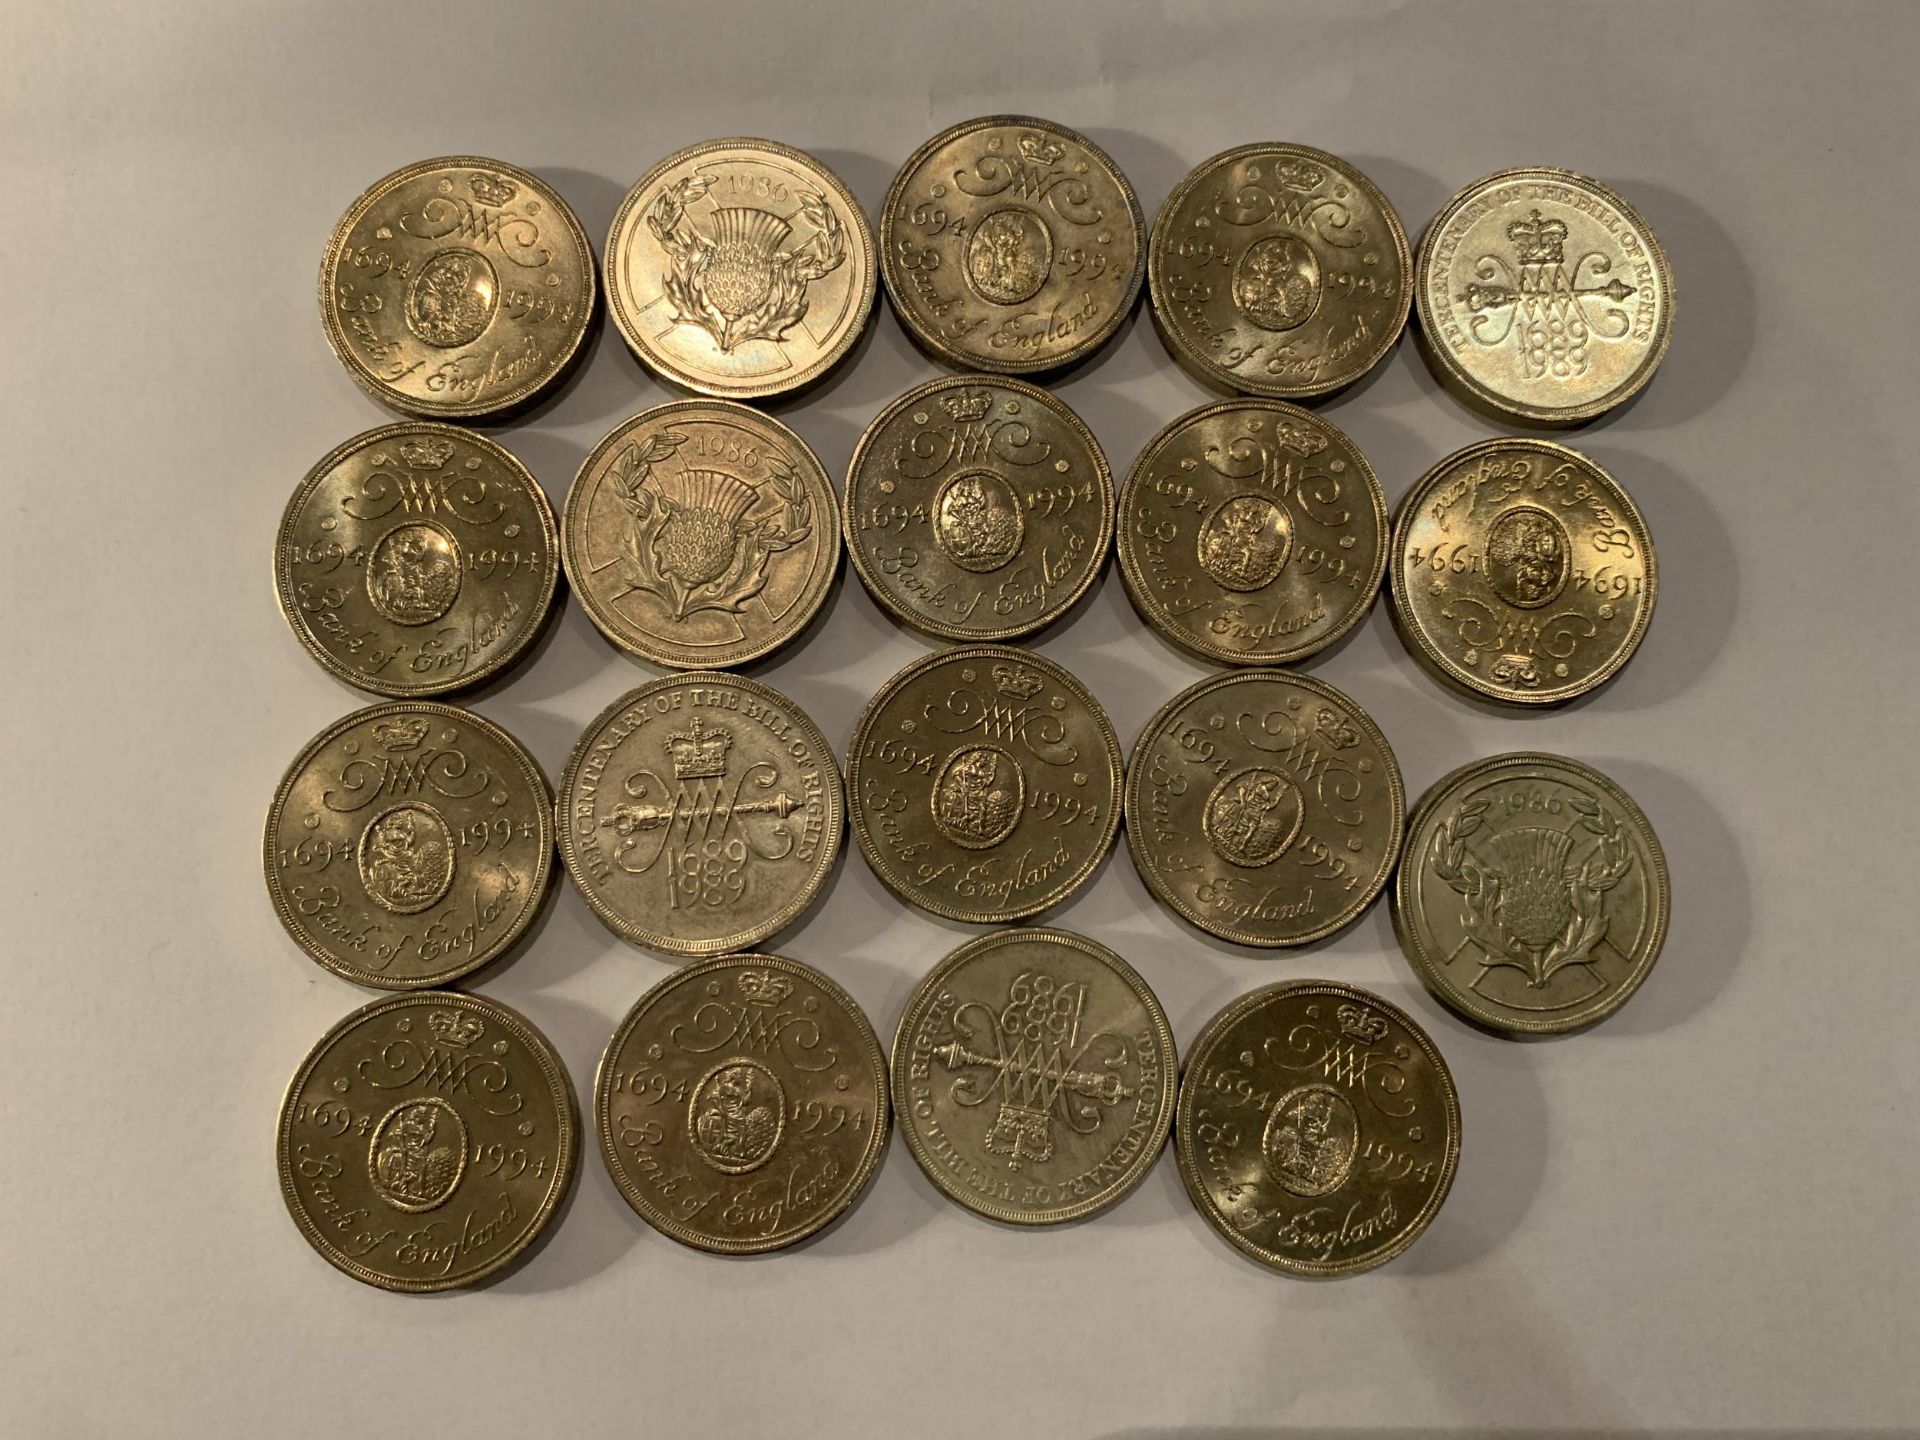 A SELECTION OF 19 UK £2 COINS , MAINLY UNCIRCULATED